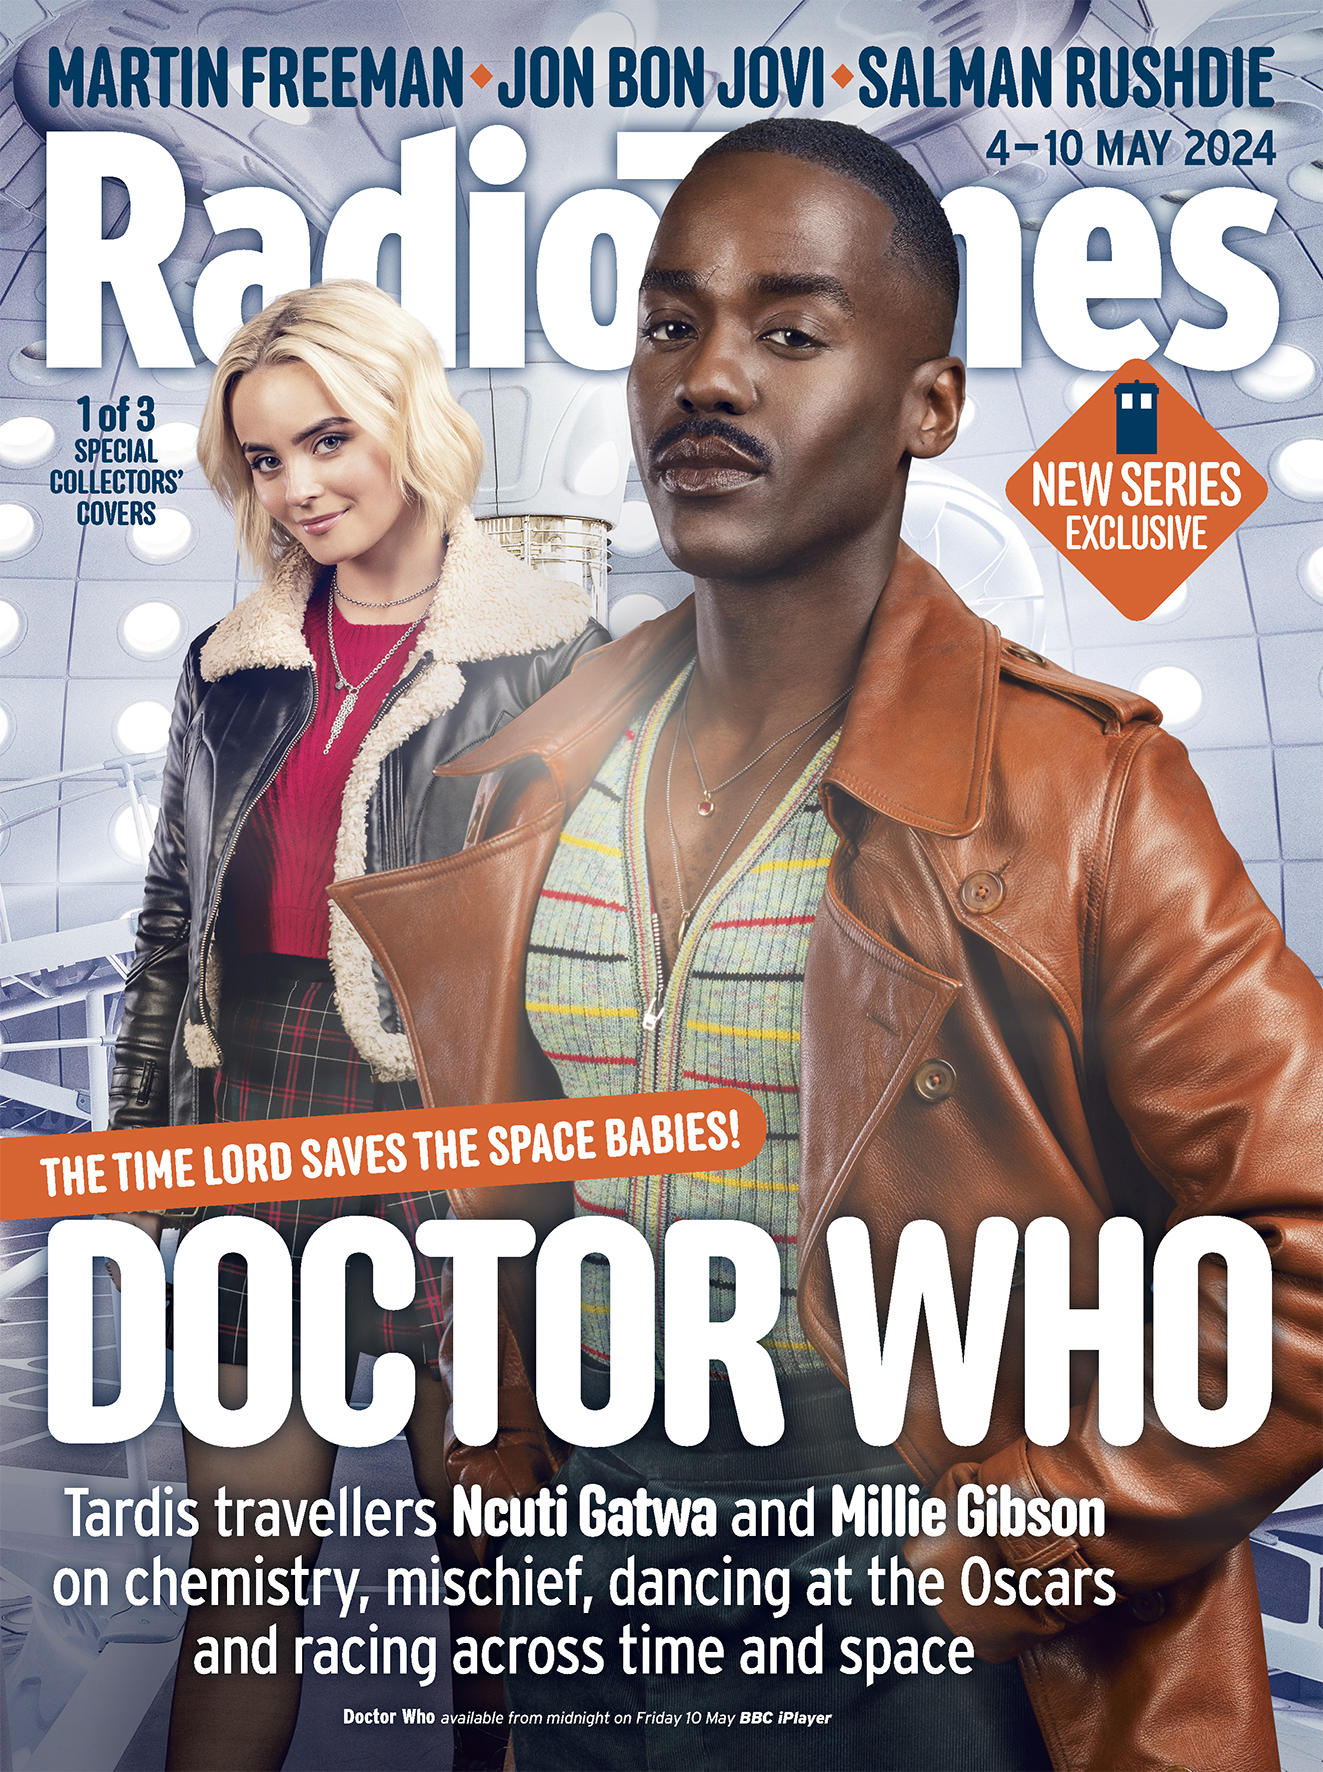 Radio Times Magazine  half price special offer on subscriptions.